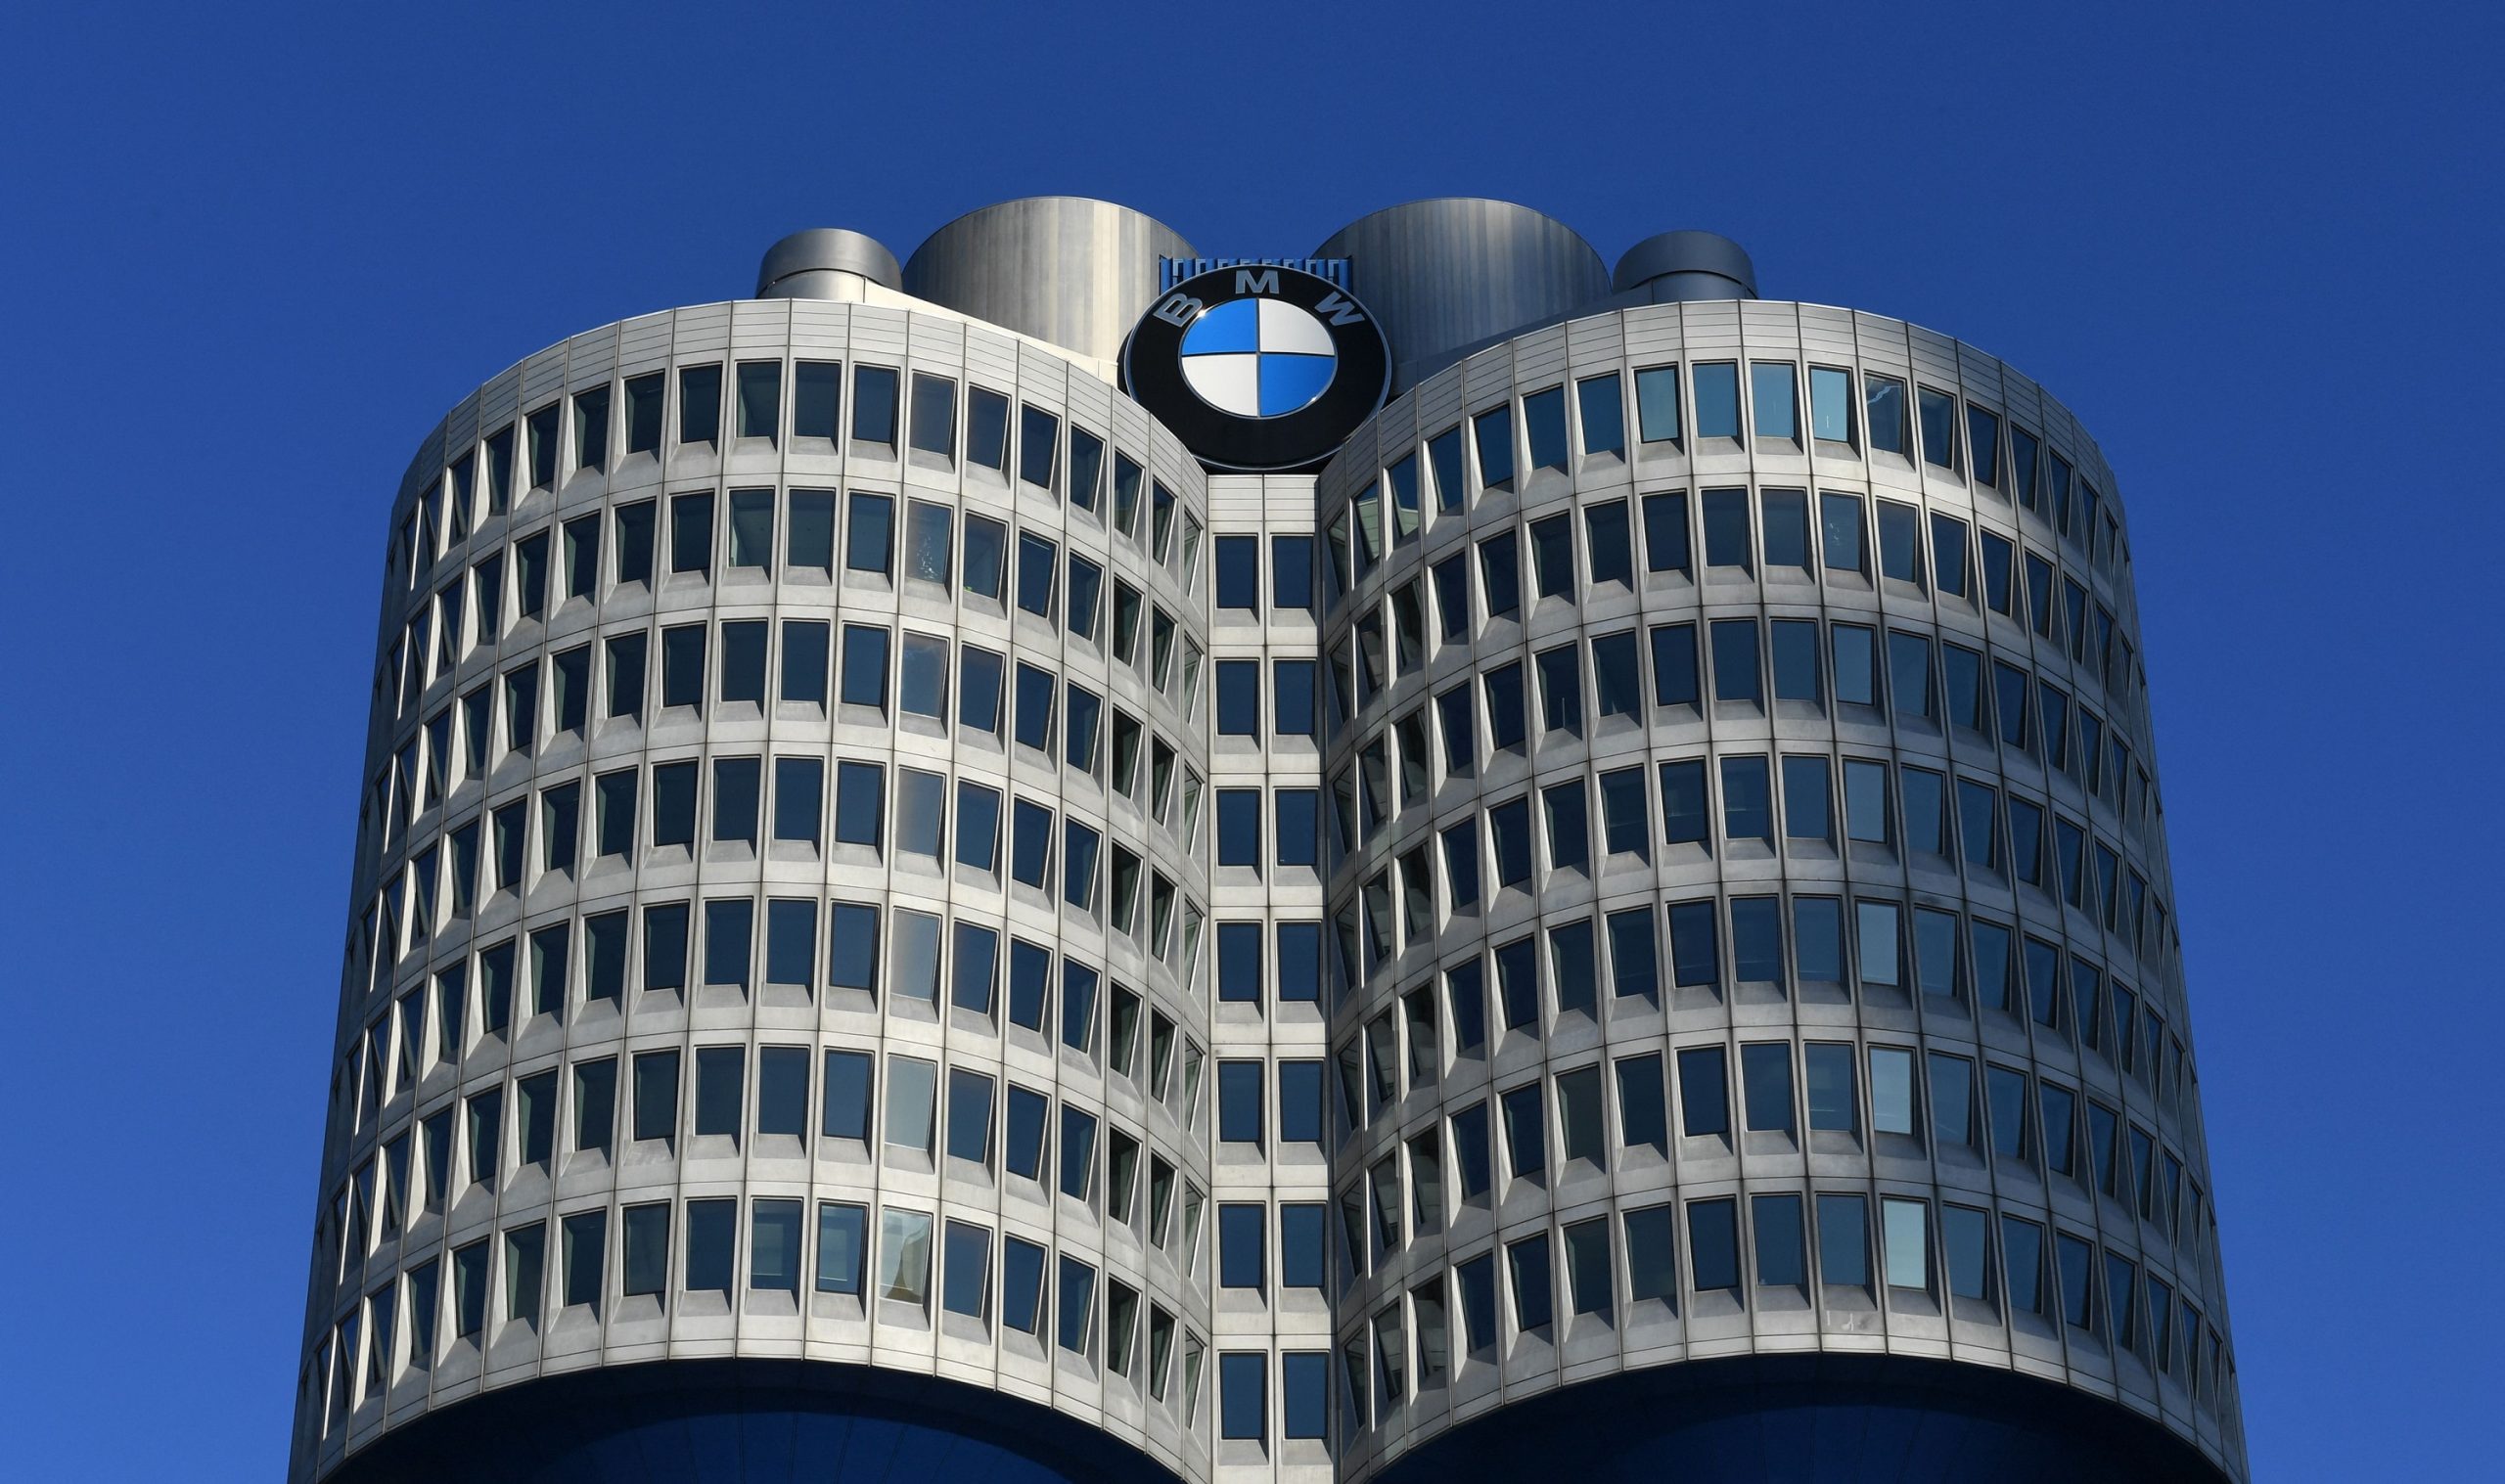 BMW's headquarters in Munich on a clear day